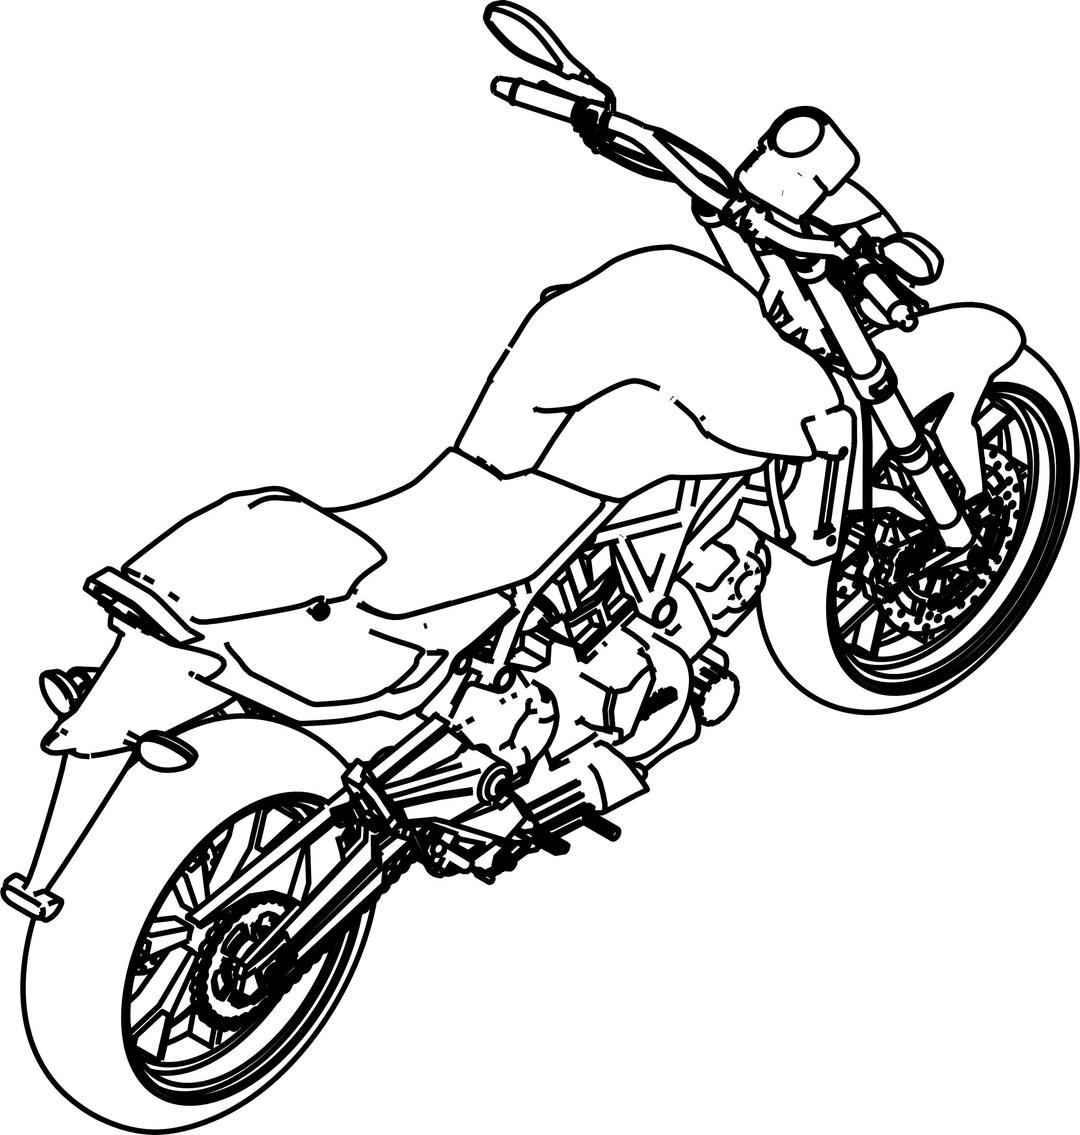 Motorcycle png transparent